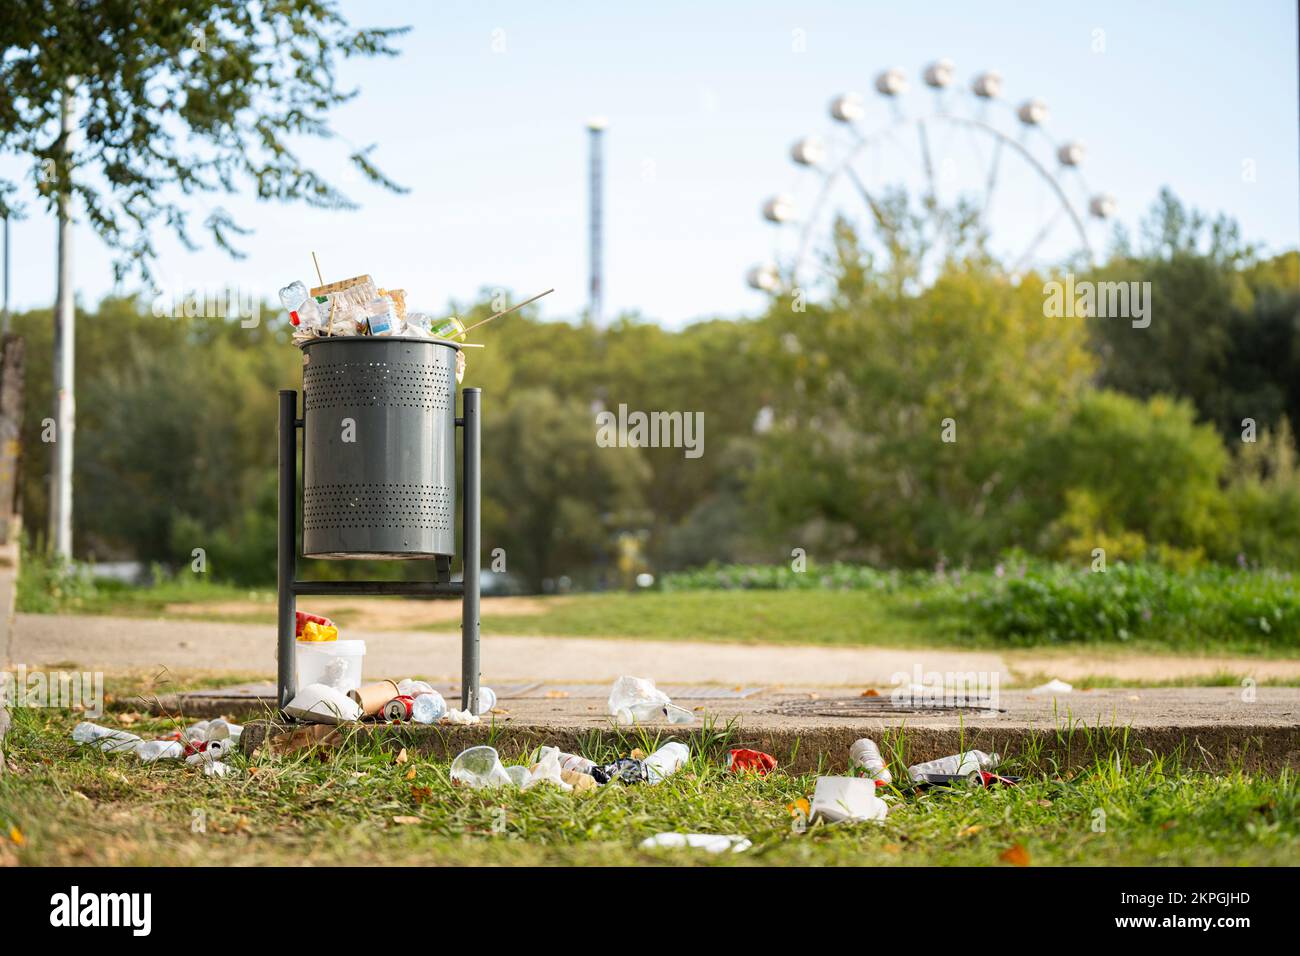 https://c8.alamy.com/comp/2KPGJHD/landscape-of-a-park-with-a-trash-can-full-of-garbage-2KPGJHD.jpg